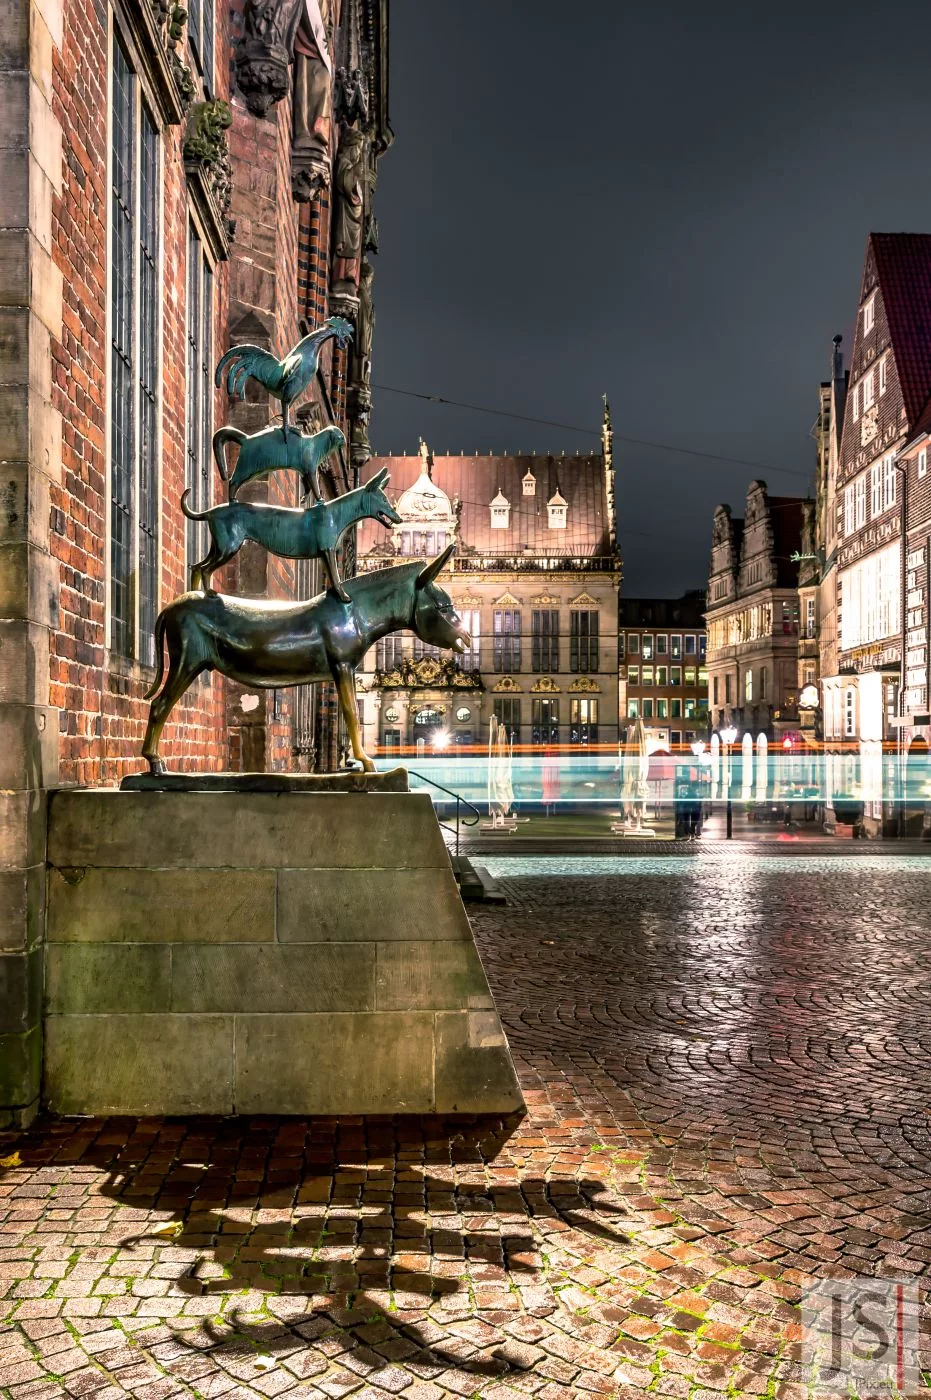 The Town Musicians of Bremen, Germany